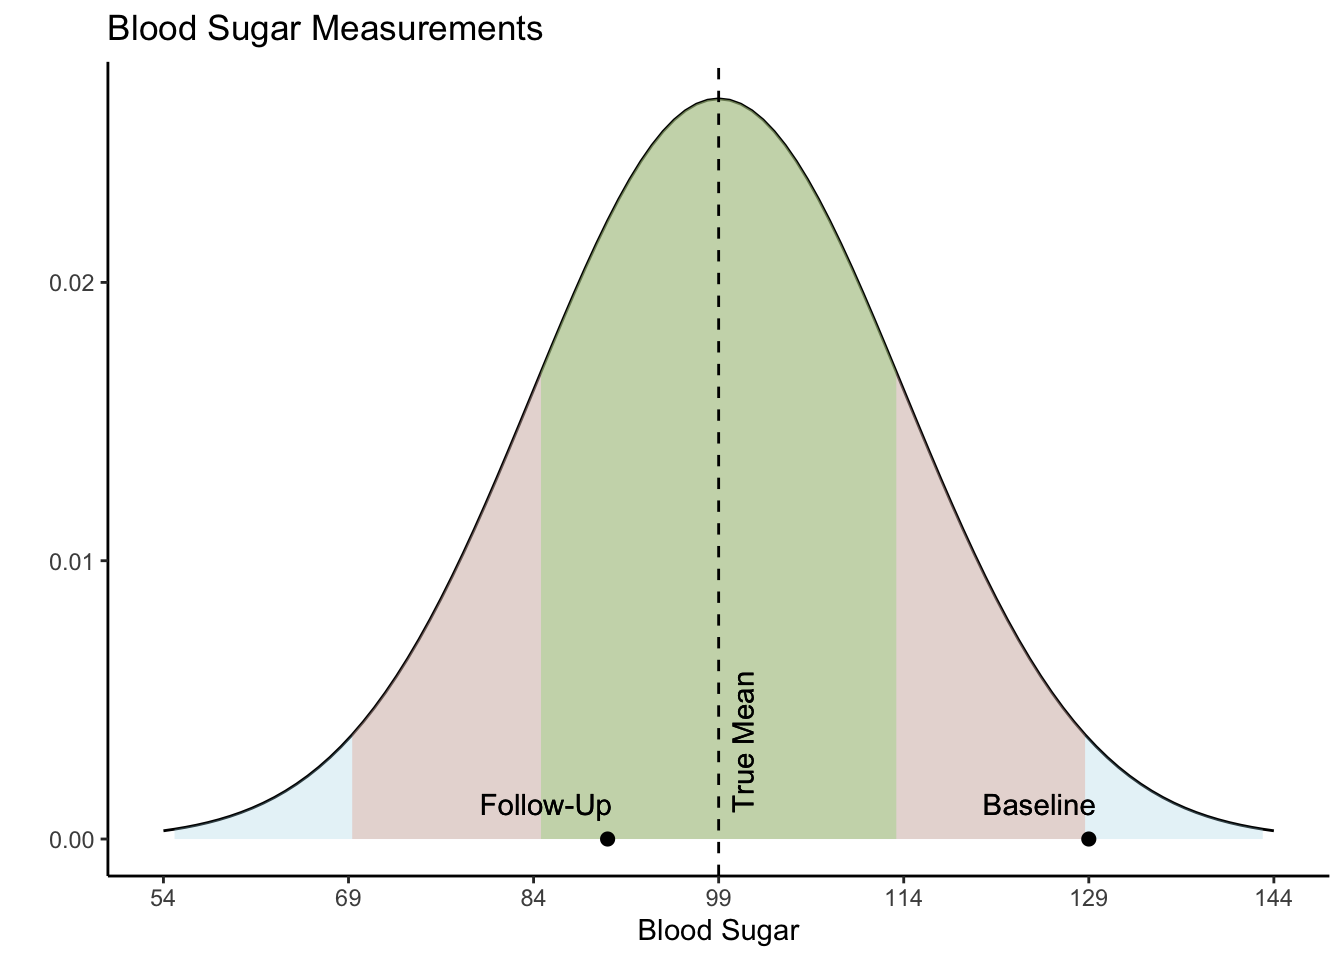 Histogram with a line indicating the mean and coloration indicating standard deviations. Data points reflecting Baseline and Follow-Up values. Baseline score is two standard deviations above the mean while the Follow-Up score is almost one standard deviation below the mean.